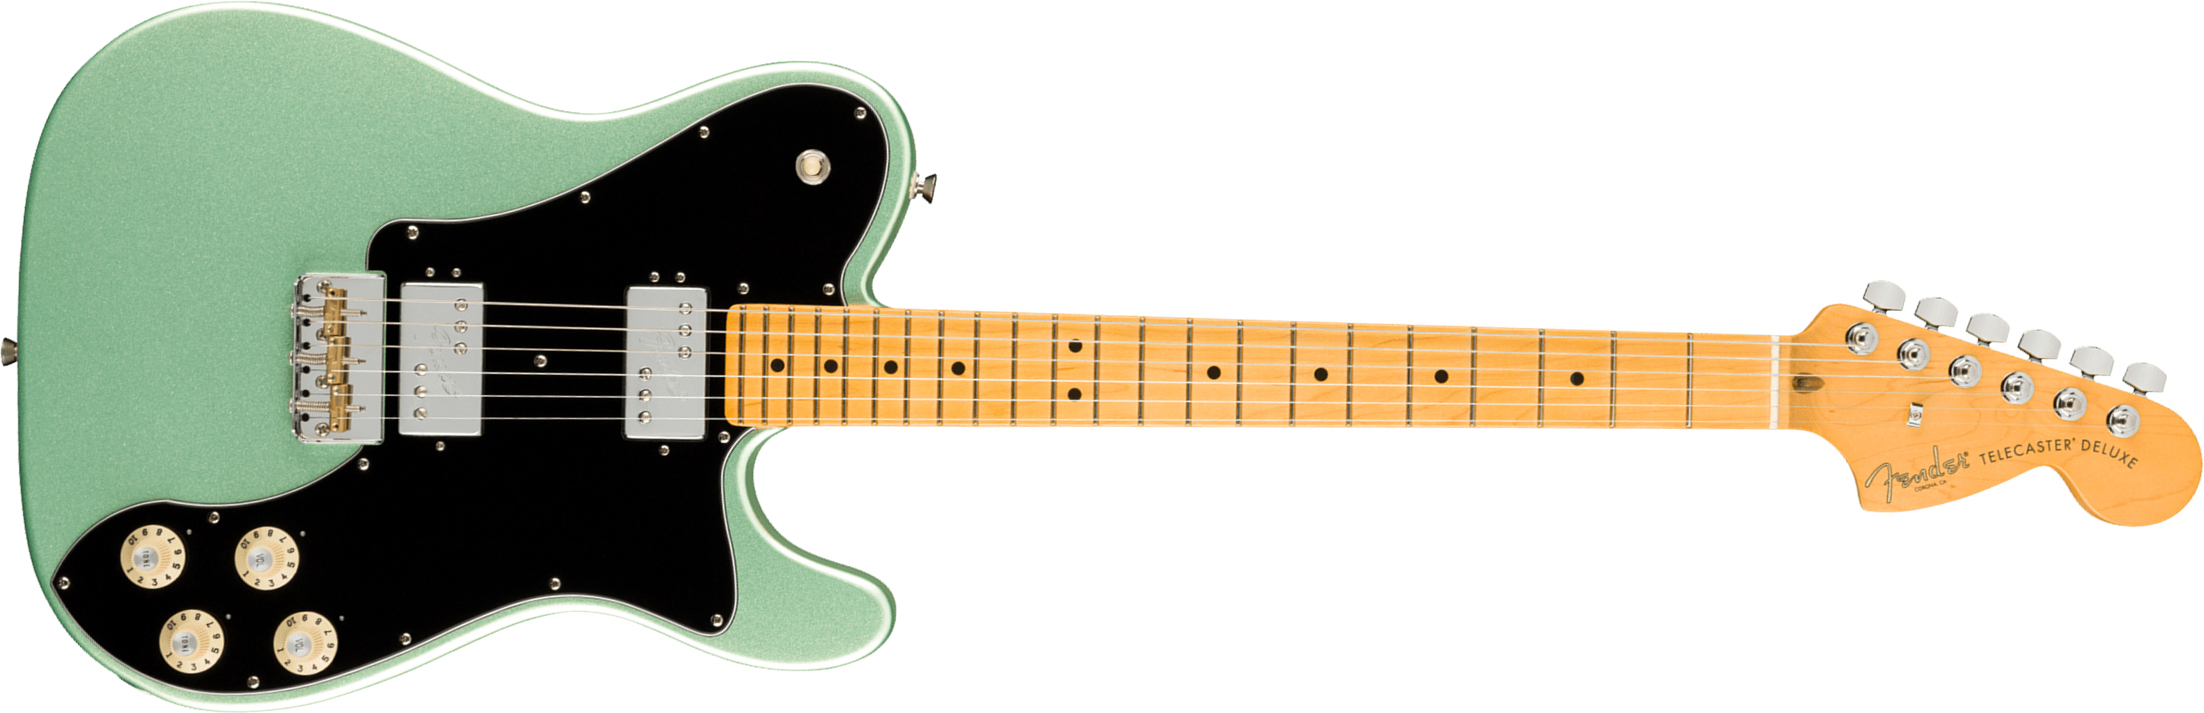 Fender Tele Deluxe American Professional Ii Usa Mn - Mystic Surf Green - Guitare Électrique Forme Tel - Main picture